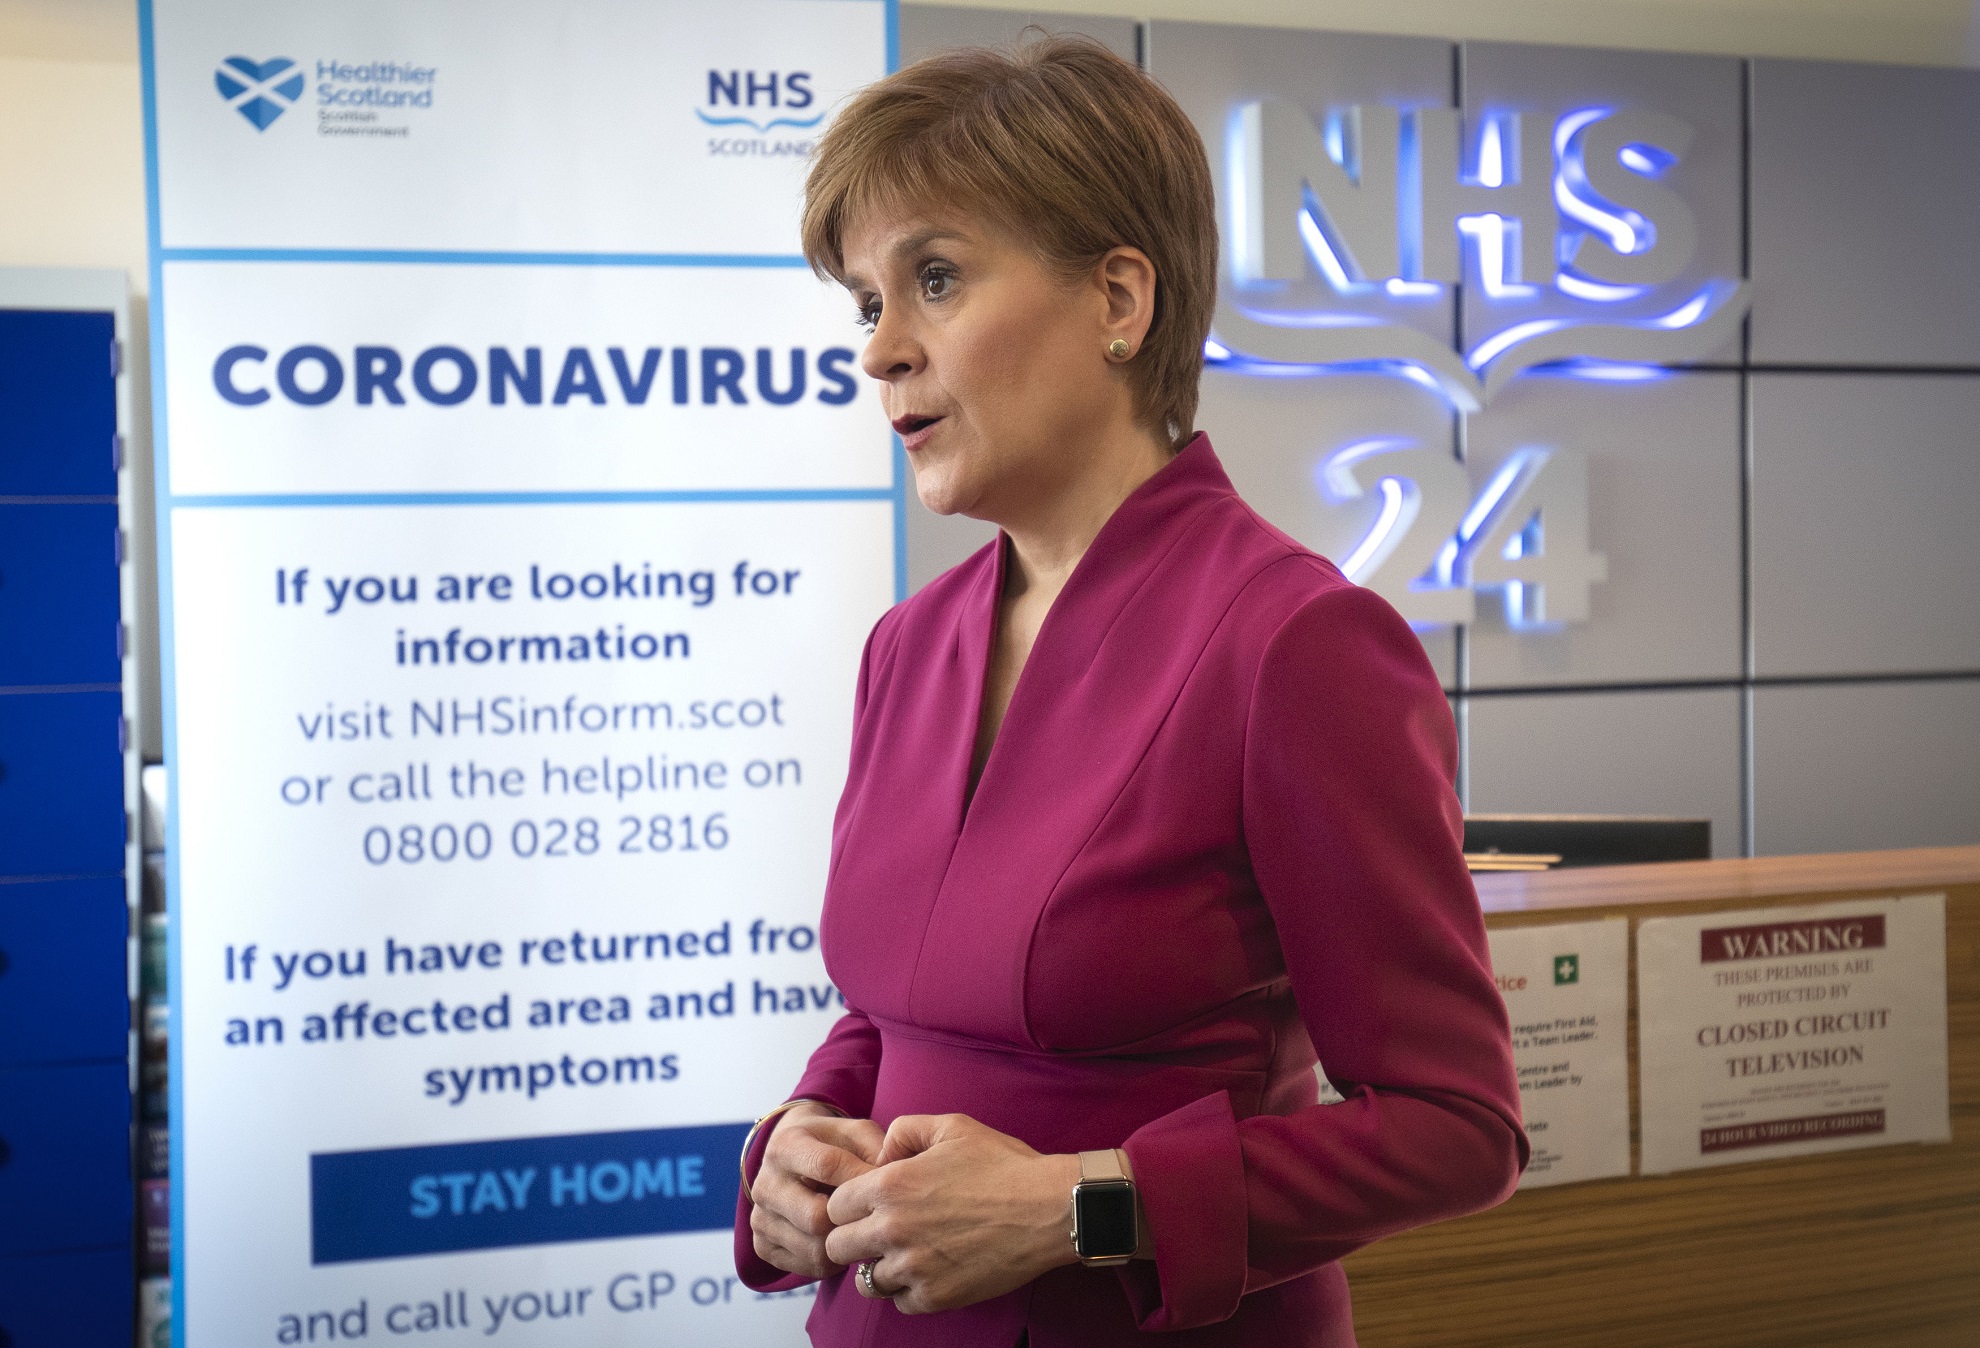 Sturgeon said the updated guidance about Christmas would be issued later on Wednesday.